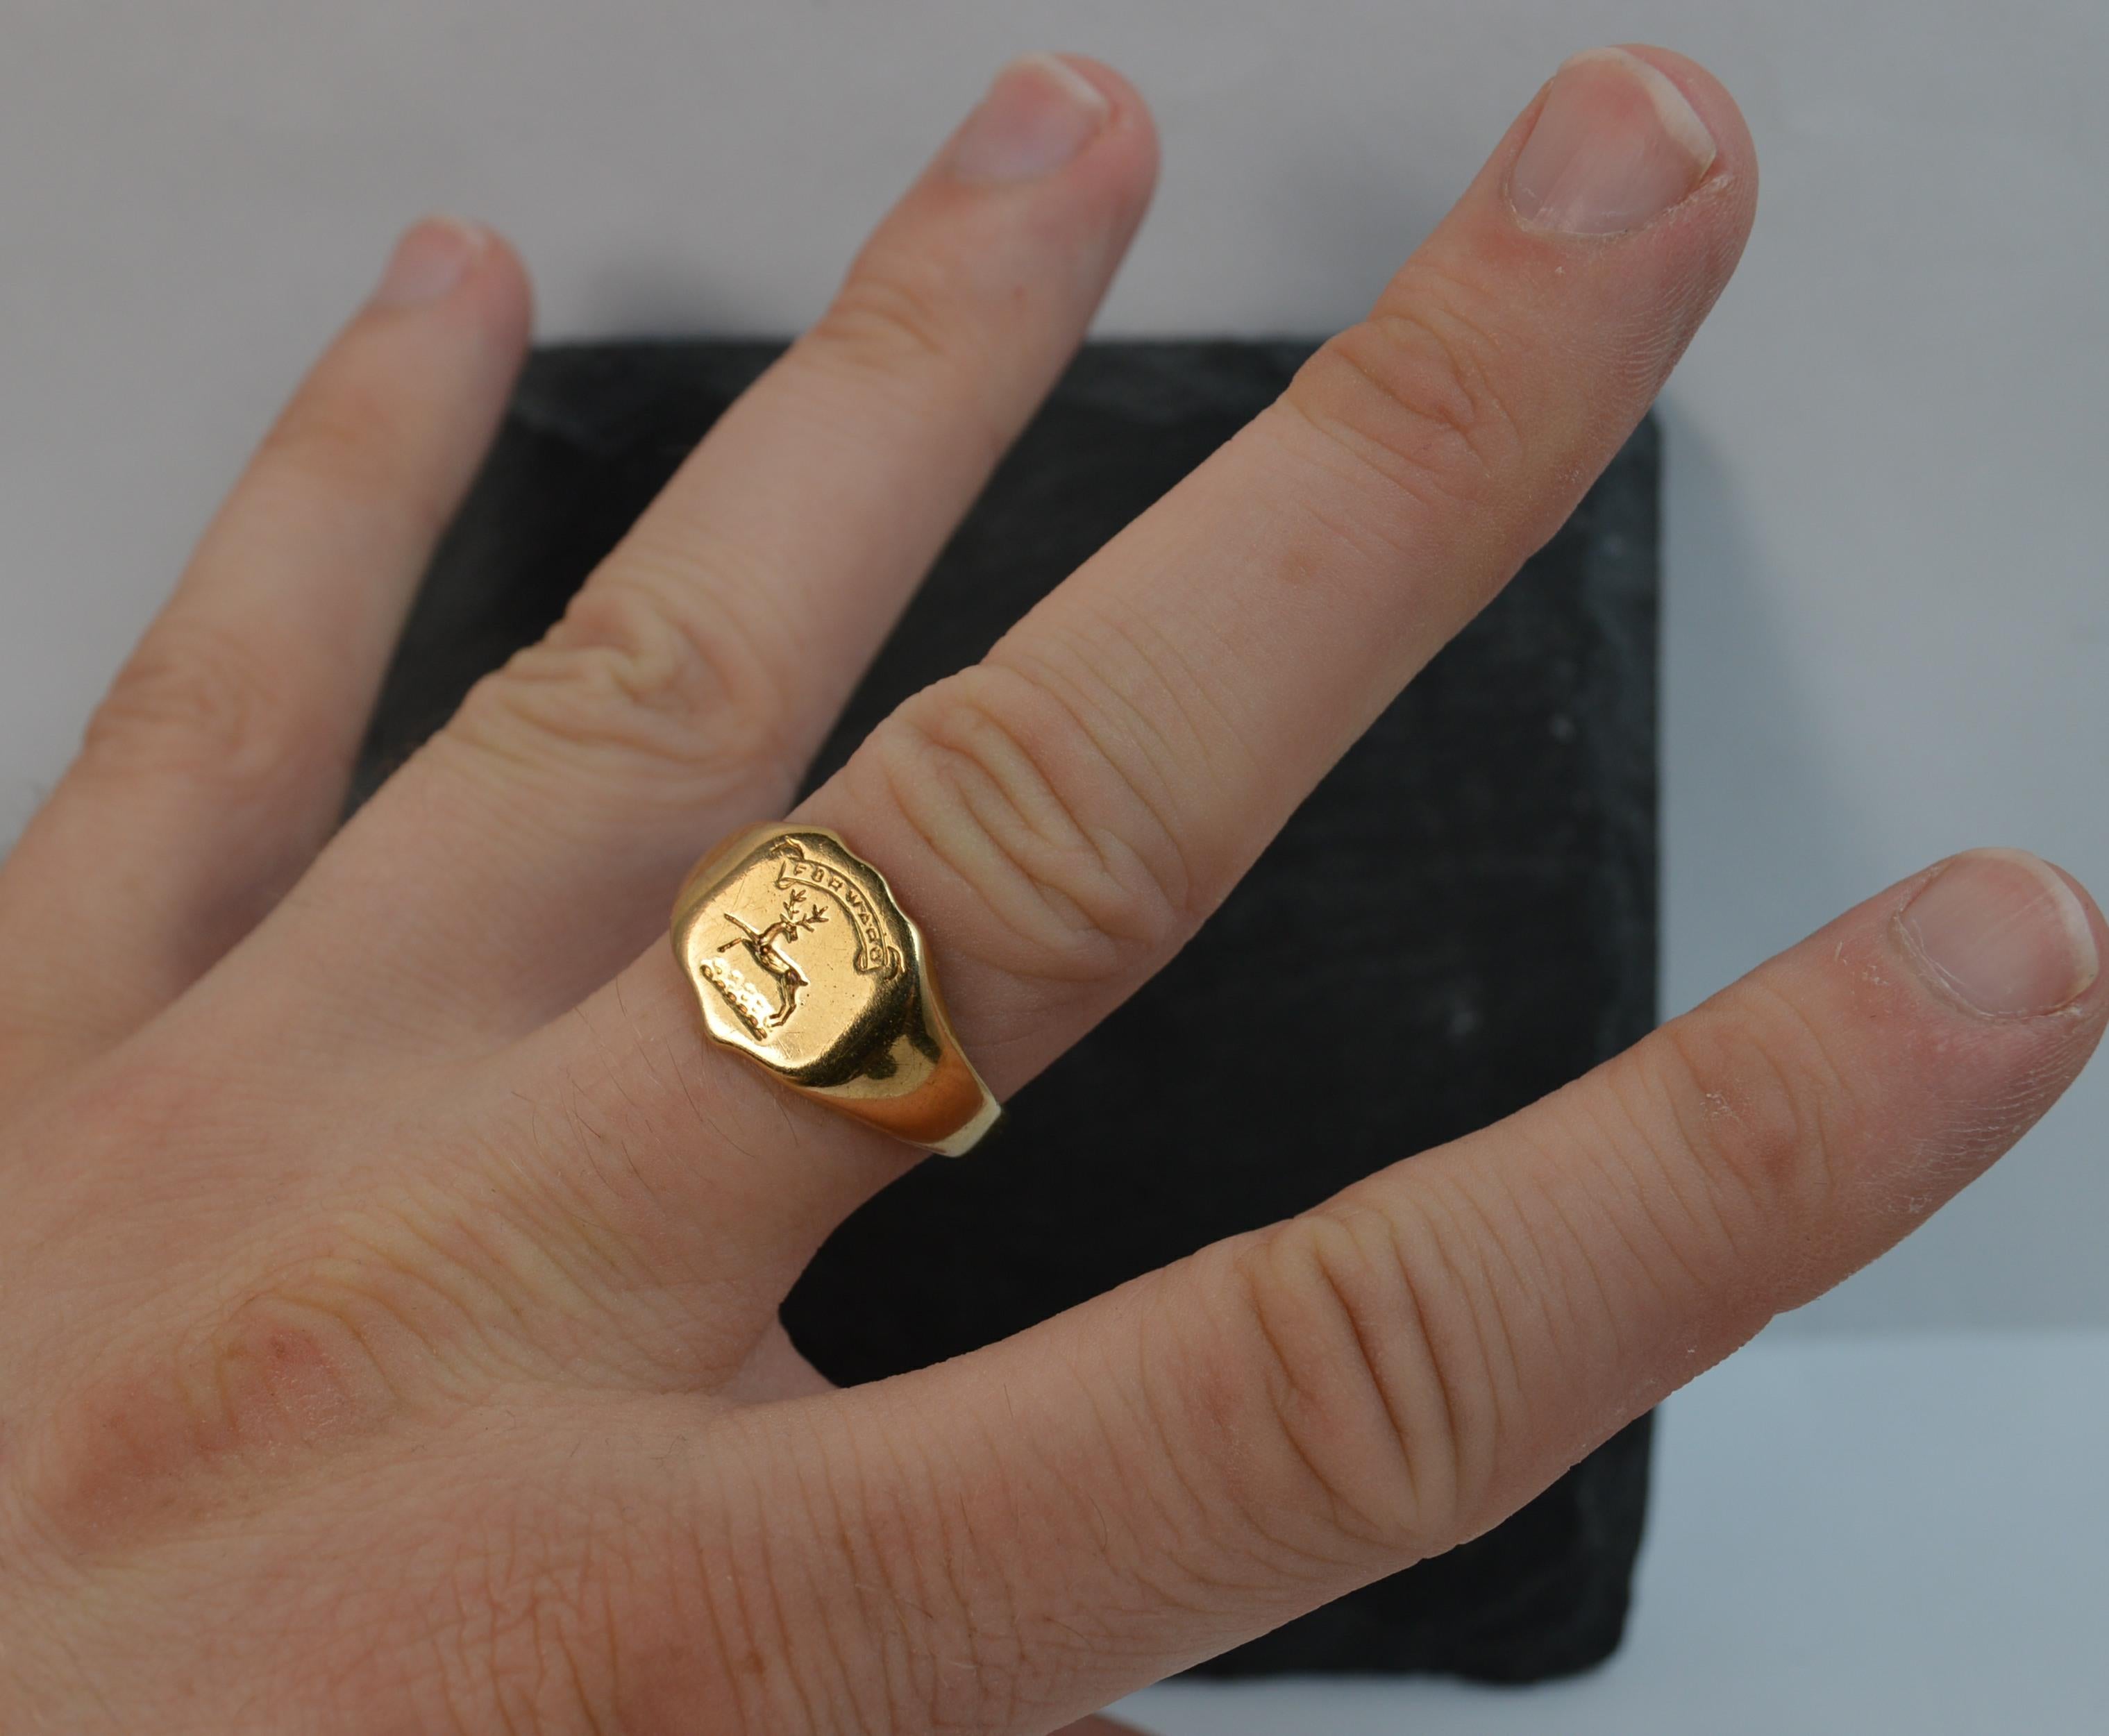 A stunning Victorian era 18ct gold signet ring.
SIZE ; T UK, 9 1/2 US, sizeable
​The 12mm x 12mm shield shaped head with banner to top with moto Forward and below a stag or deer running.
A very solid 18 carat yellow gold example.


CONDITION ; Very